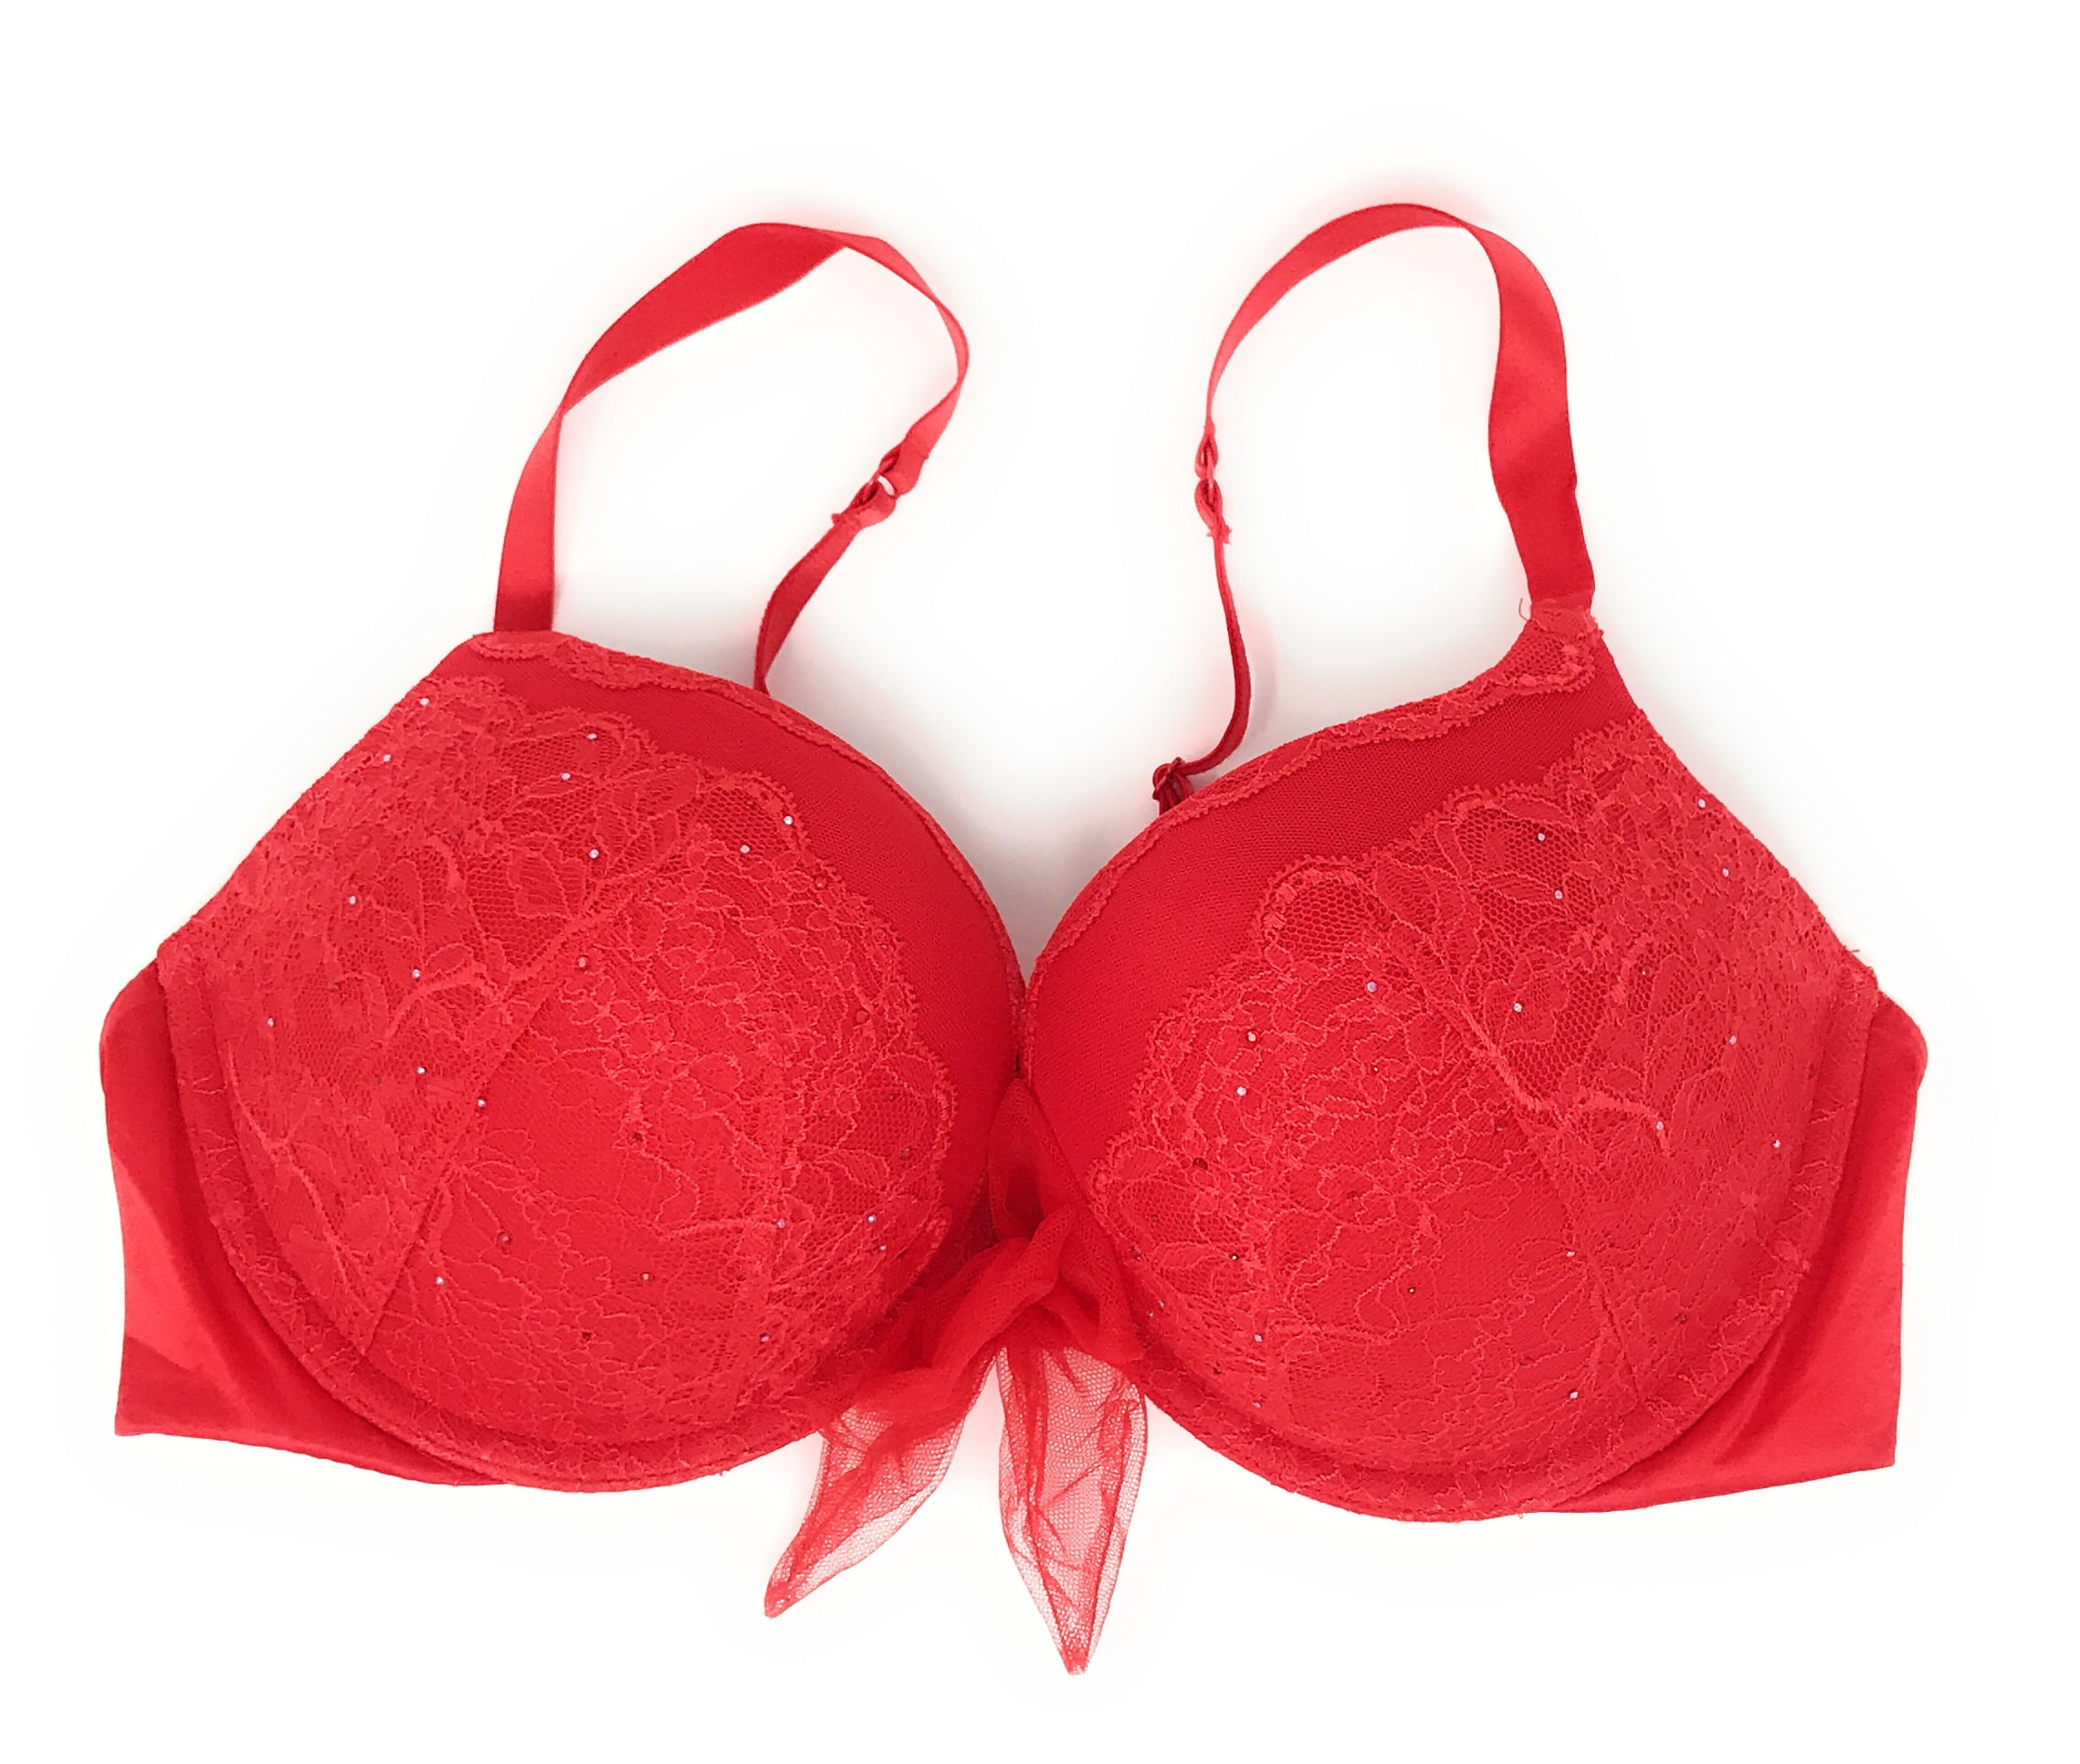  Victorias Secret Bombshell Shine Strap Push Up Bra, Add 2  Cups, Plunge Neckline, Lace, Bras For Women, Very Sexy Collection, Red